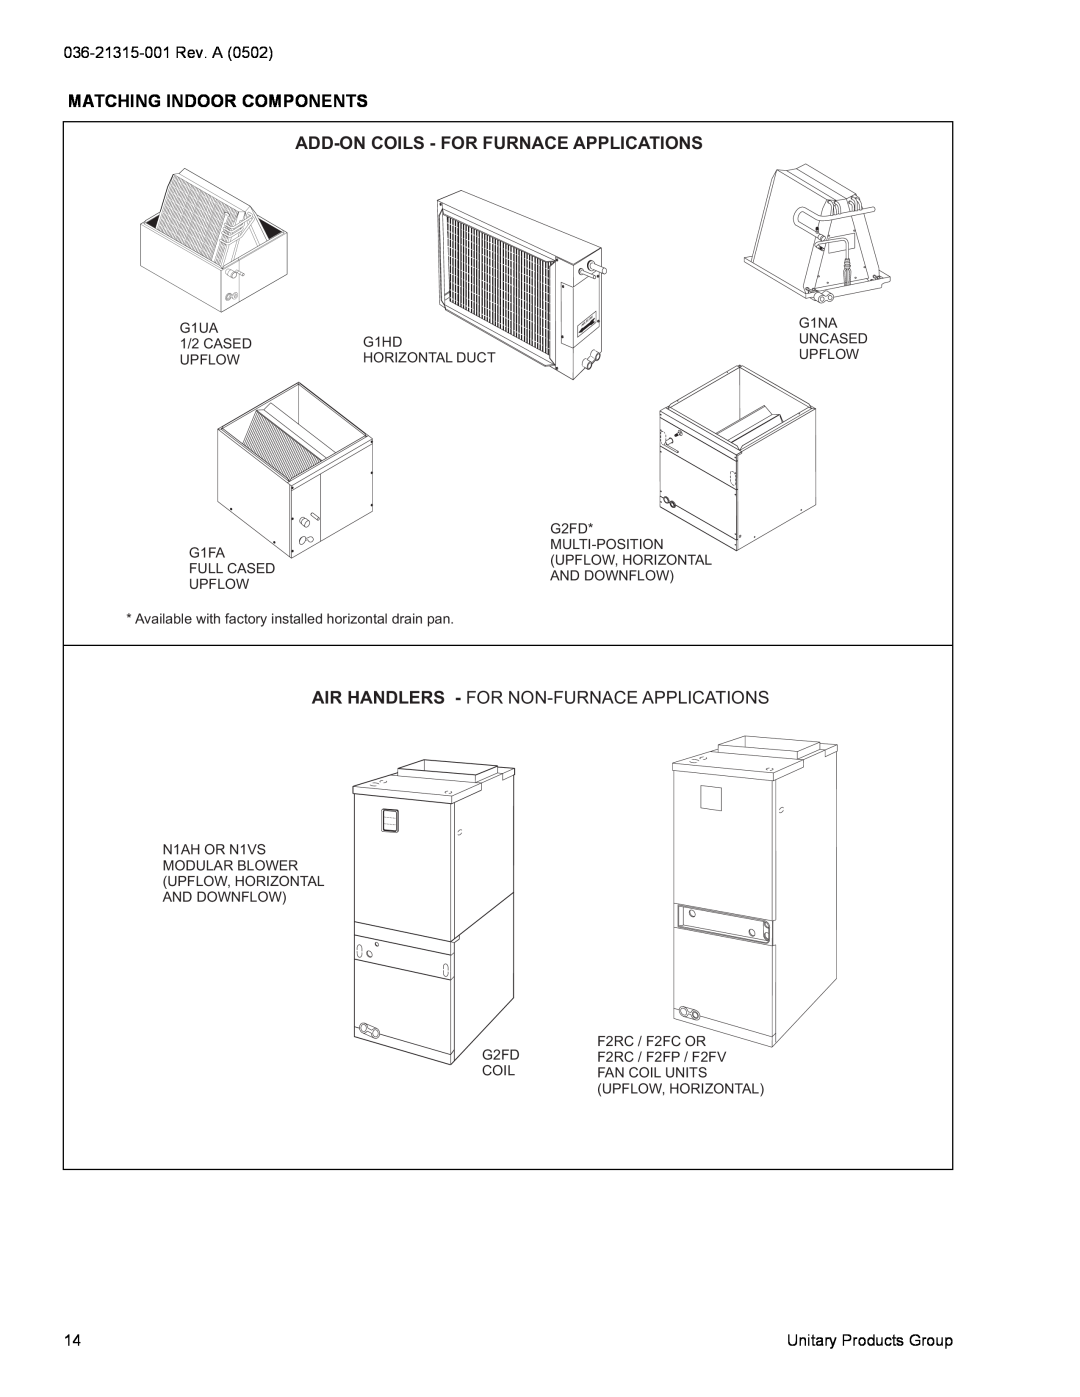 York H*RE024 warranty Matching Indoor Components, Add-Oncoils - For Furnace Applications 